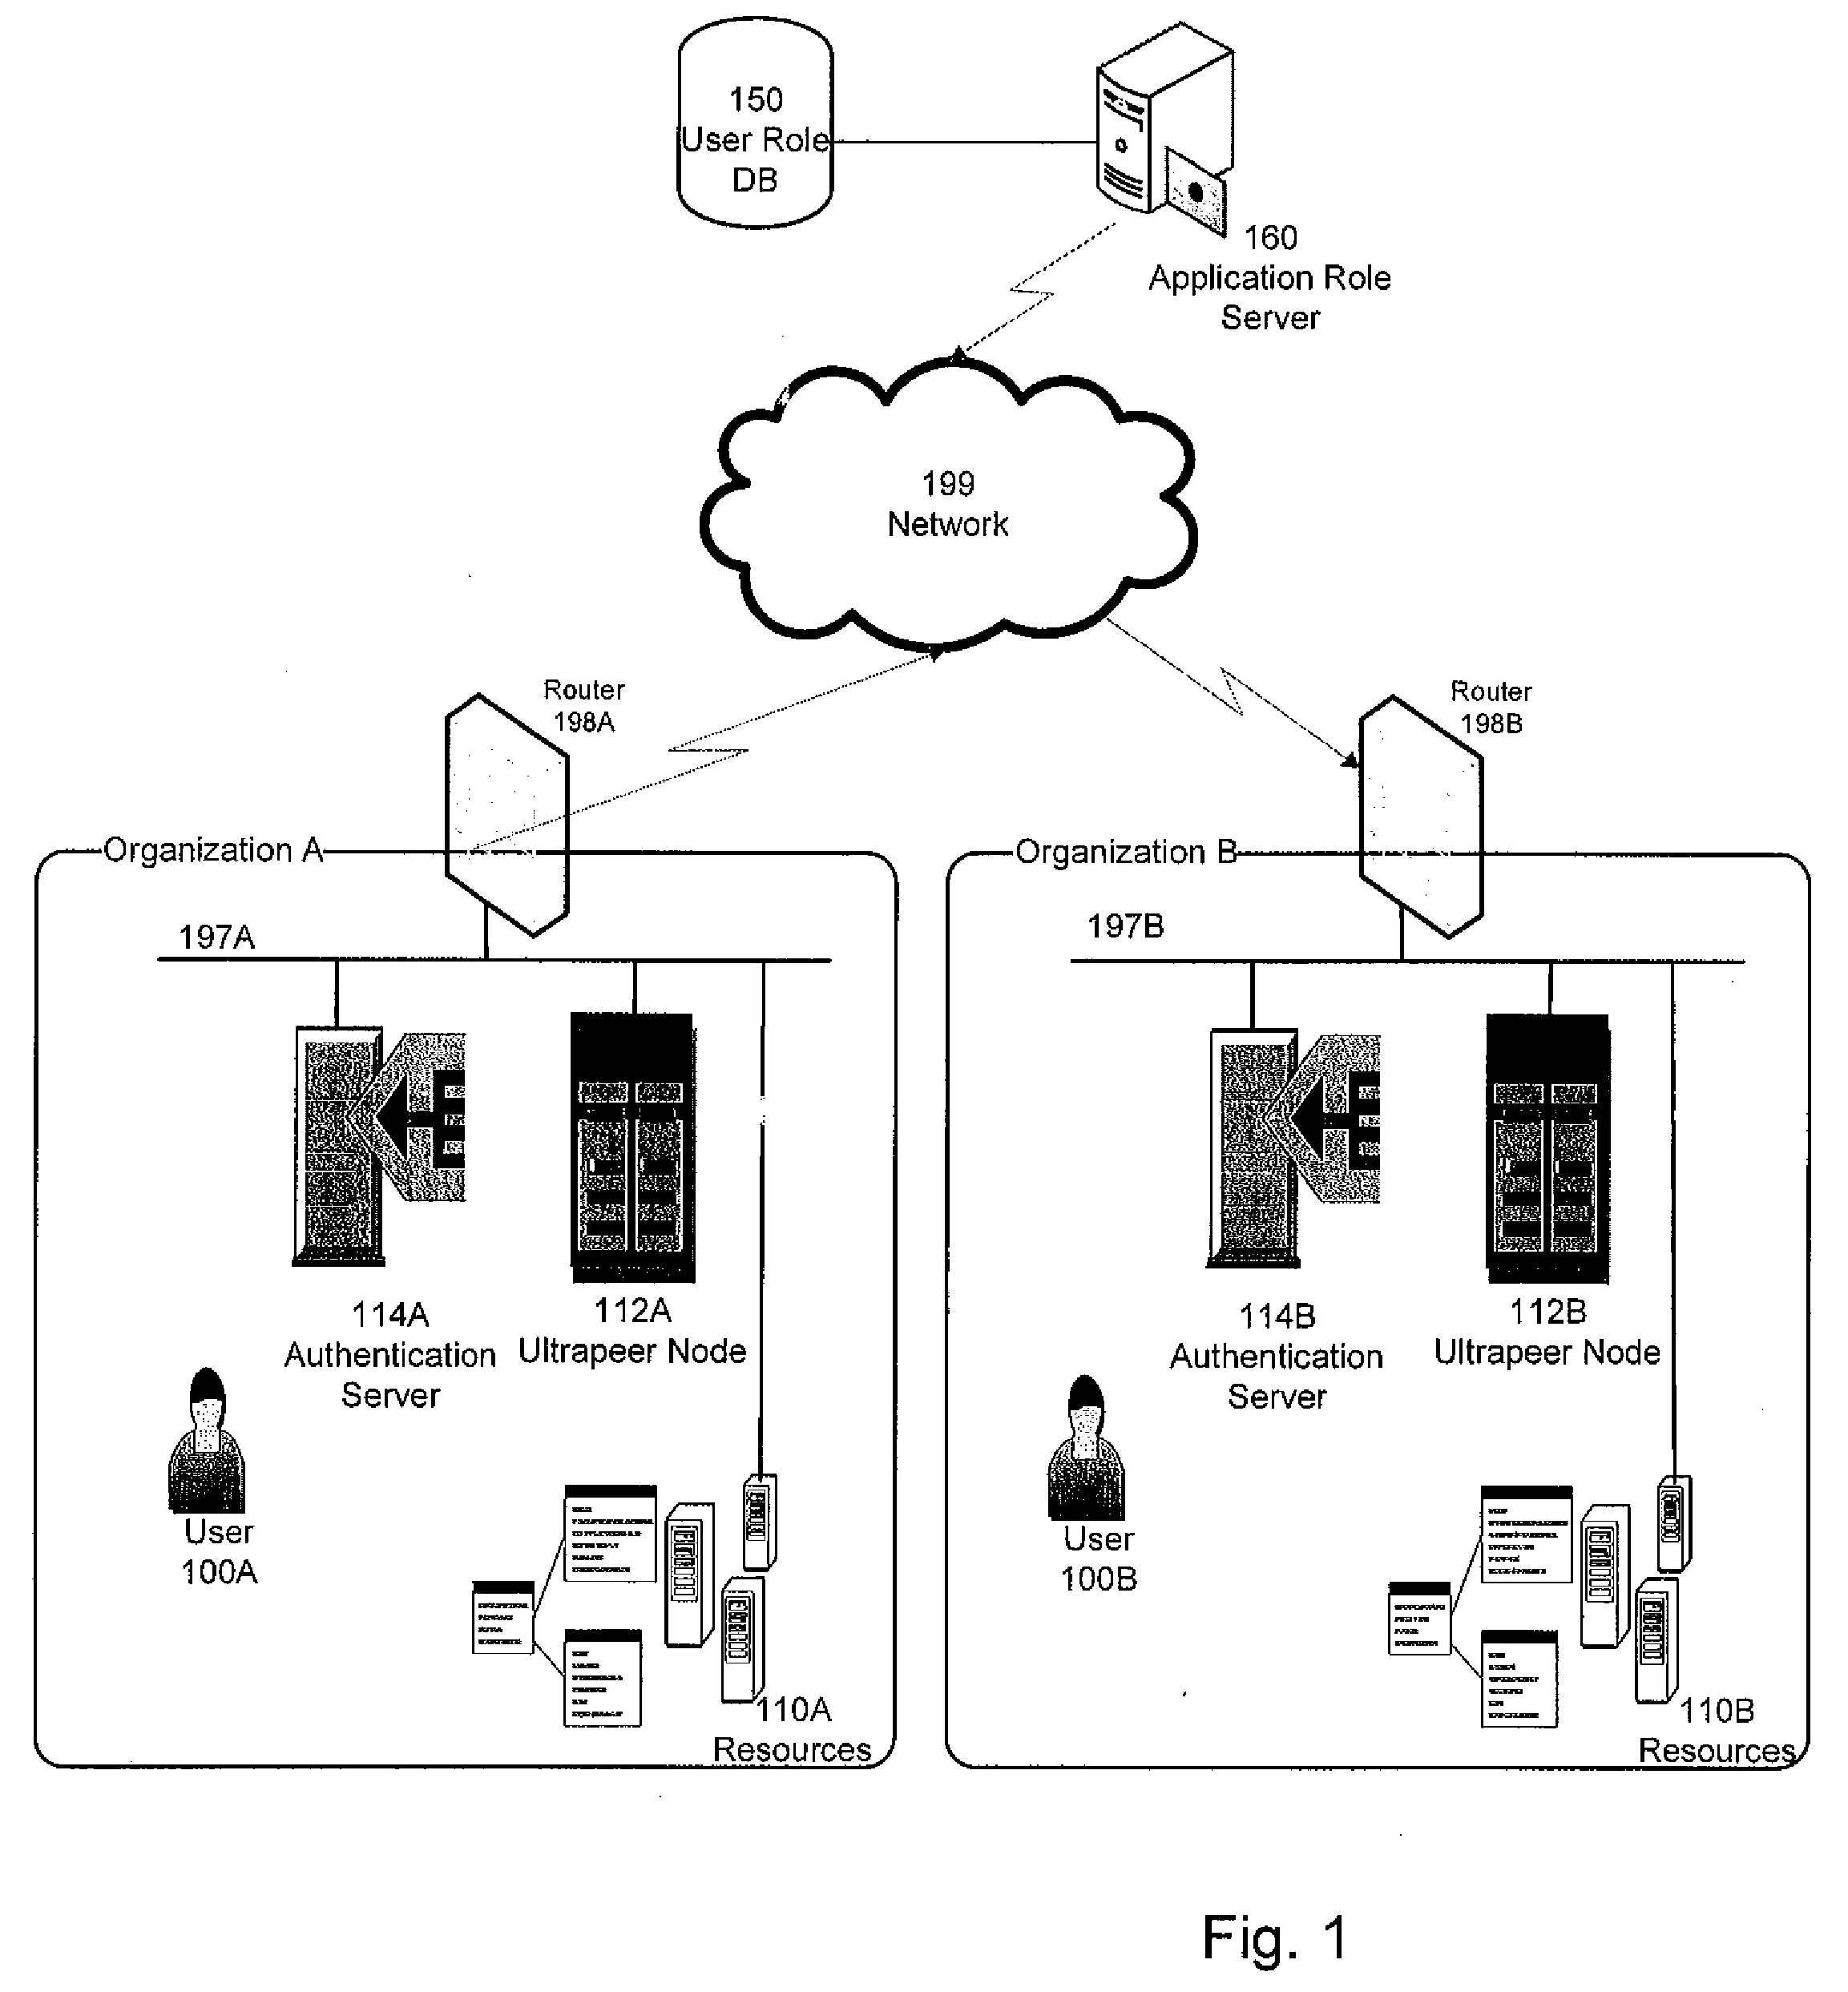 Role-based access control to computing resources in an inter-organizational community